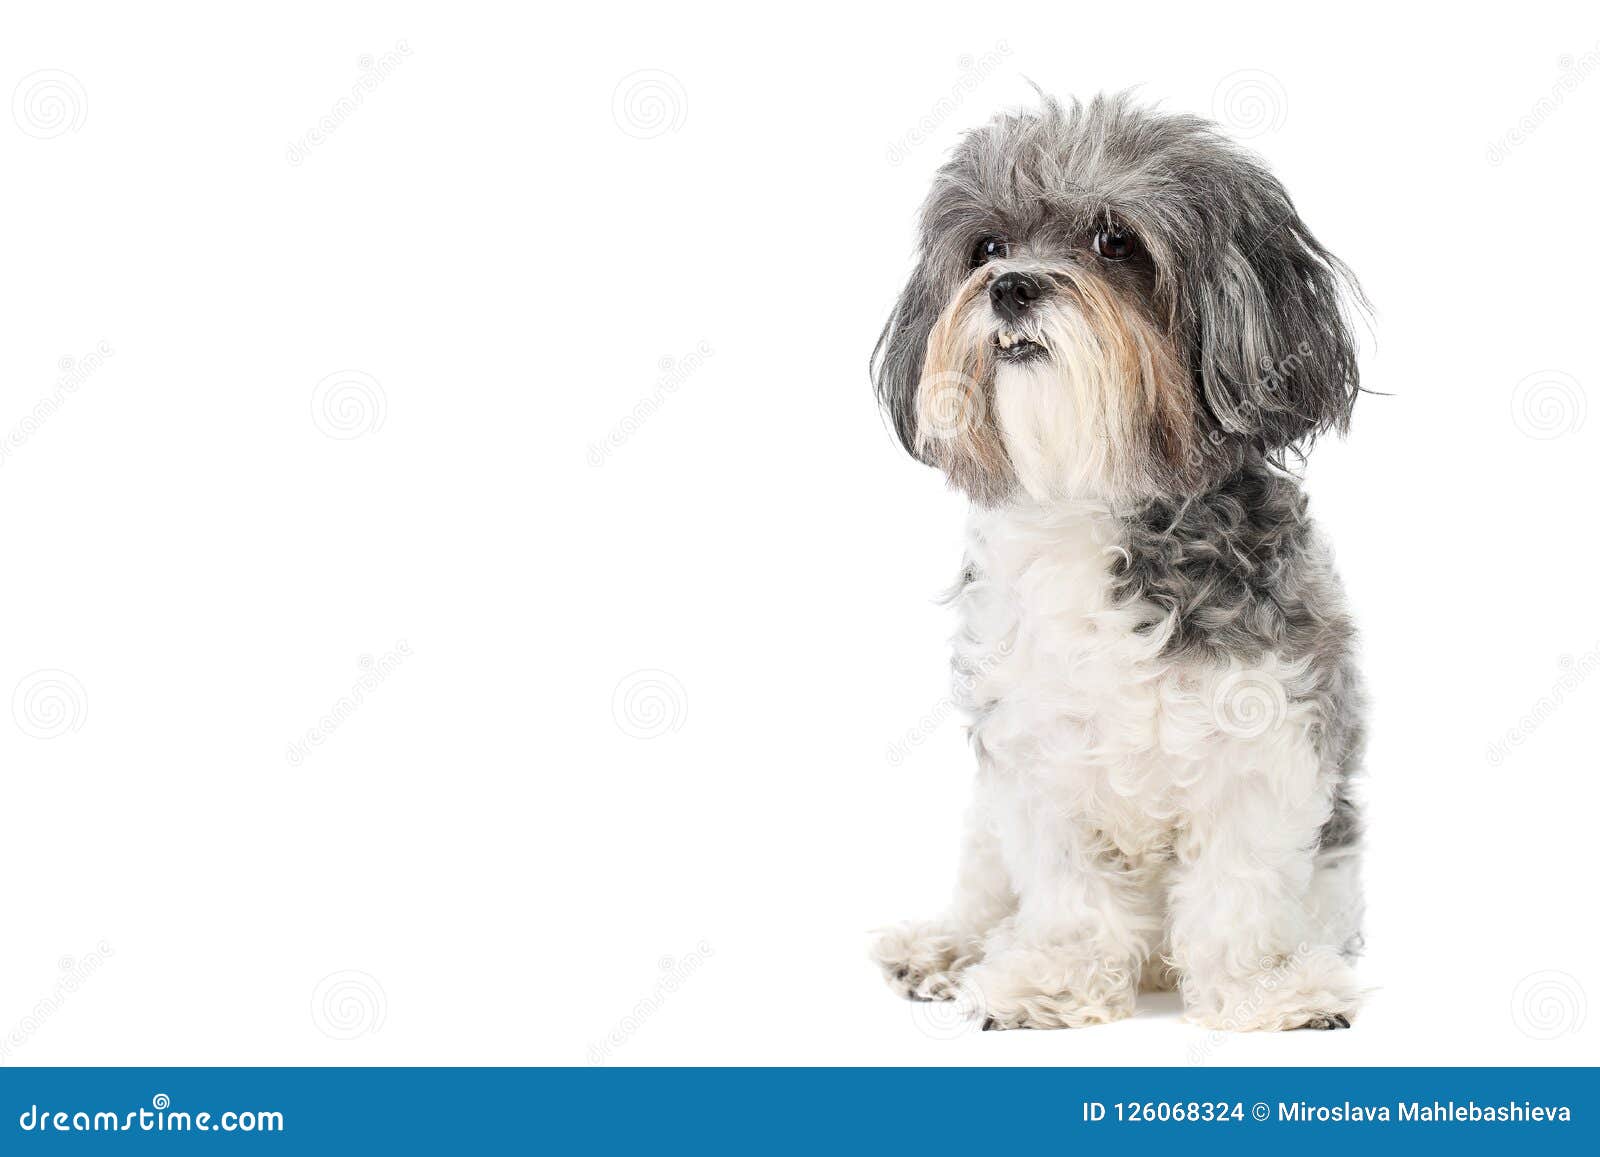 Studio Portrait Of An Adorable Grey And White Bichon Havanese Dog With Cute Bristling Hair Isolated On White Background Stock Photo Image Of Friend Bristling 126068324